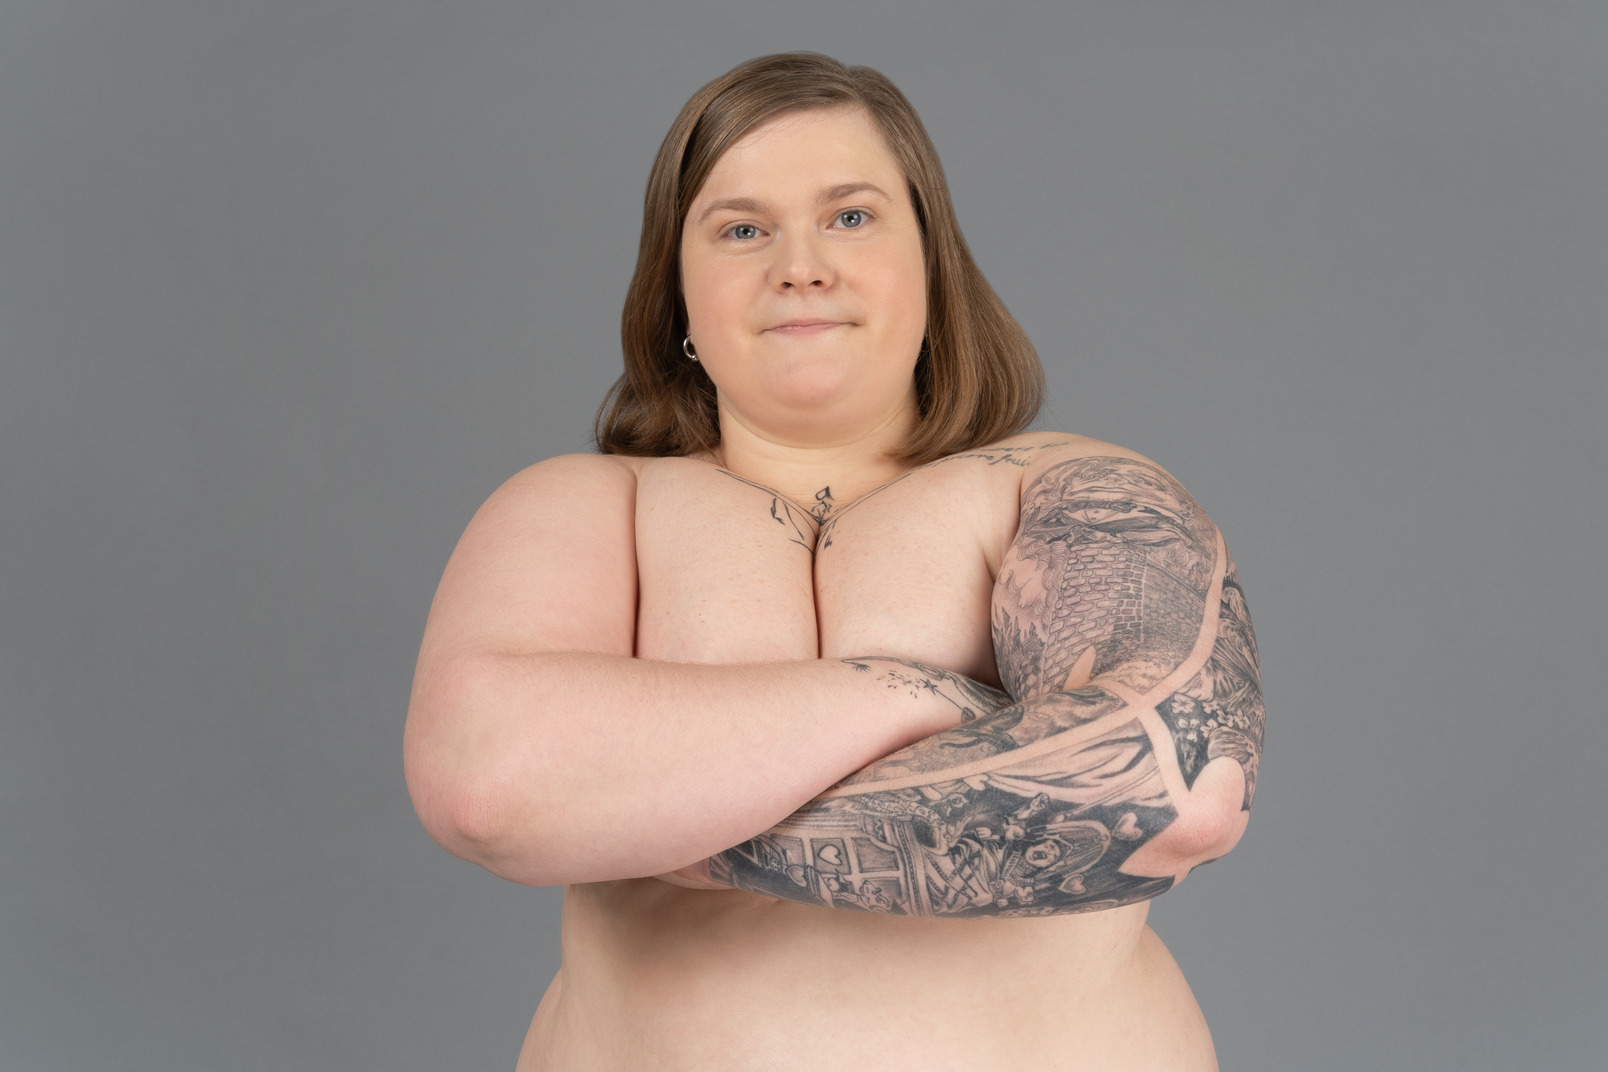 Plus size woman standing with her arms crossed